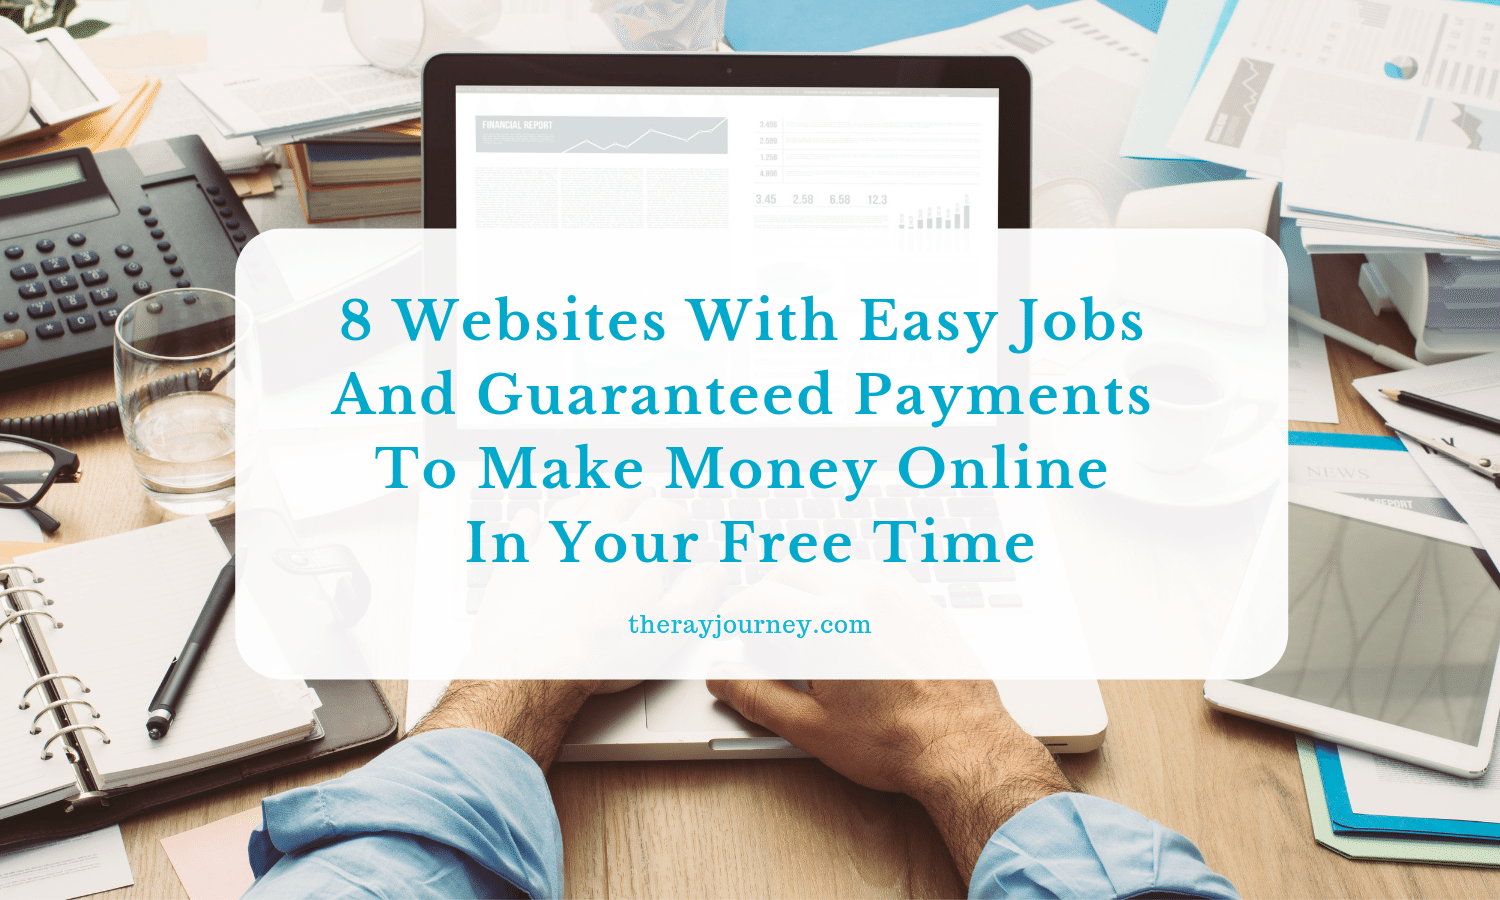 8 Websites With Easy Jobs And Guaranteed Payments To Make Money Online In Your Free Time